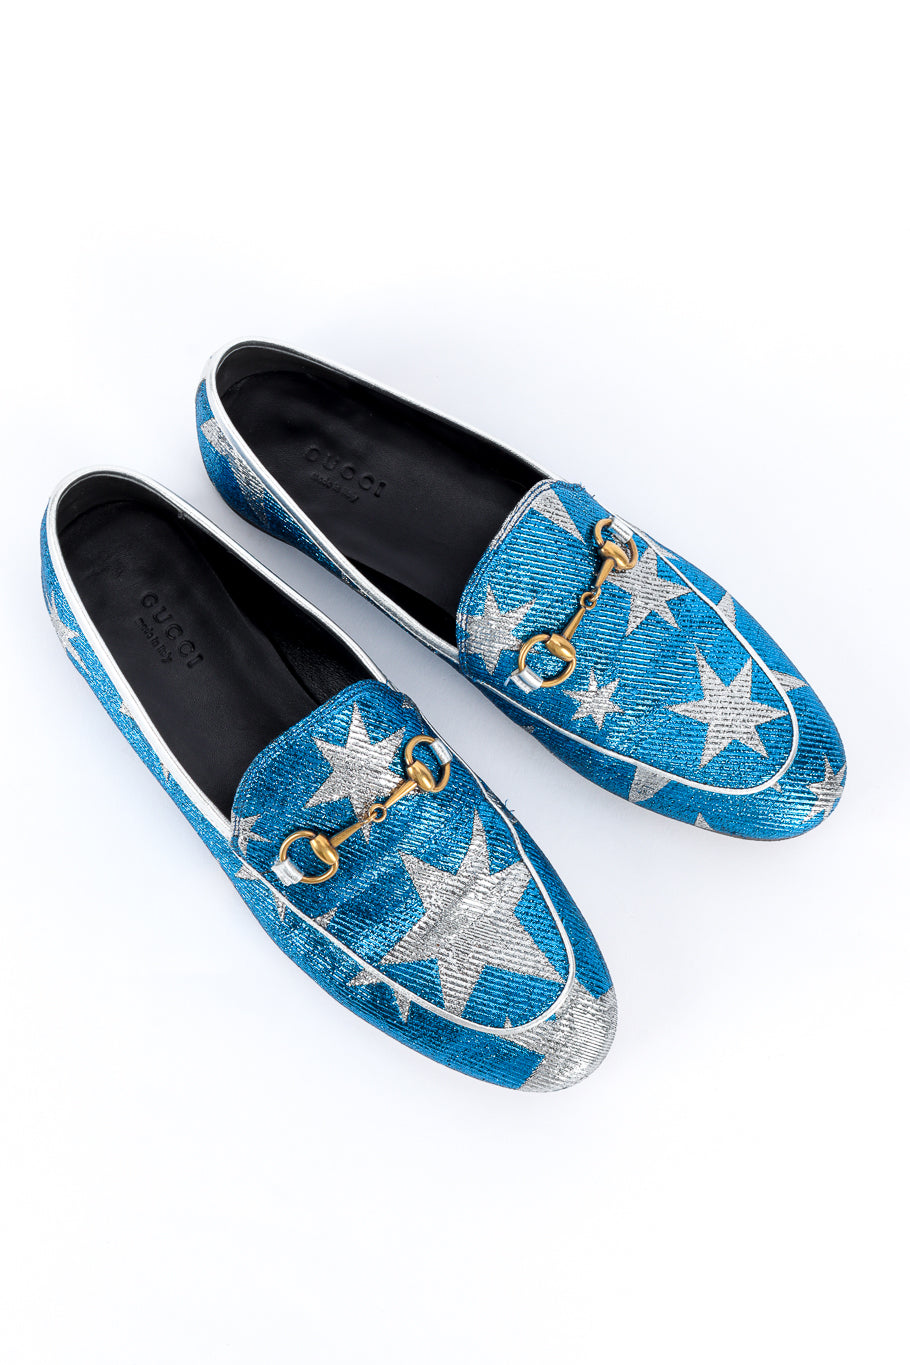 Gucci Starry Sky Lurex Loafers top view @recess la